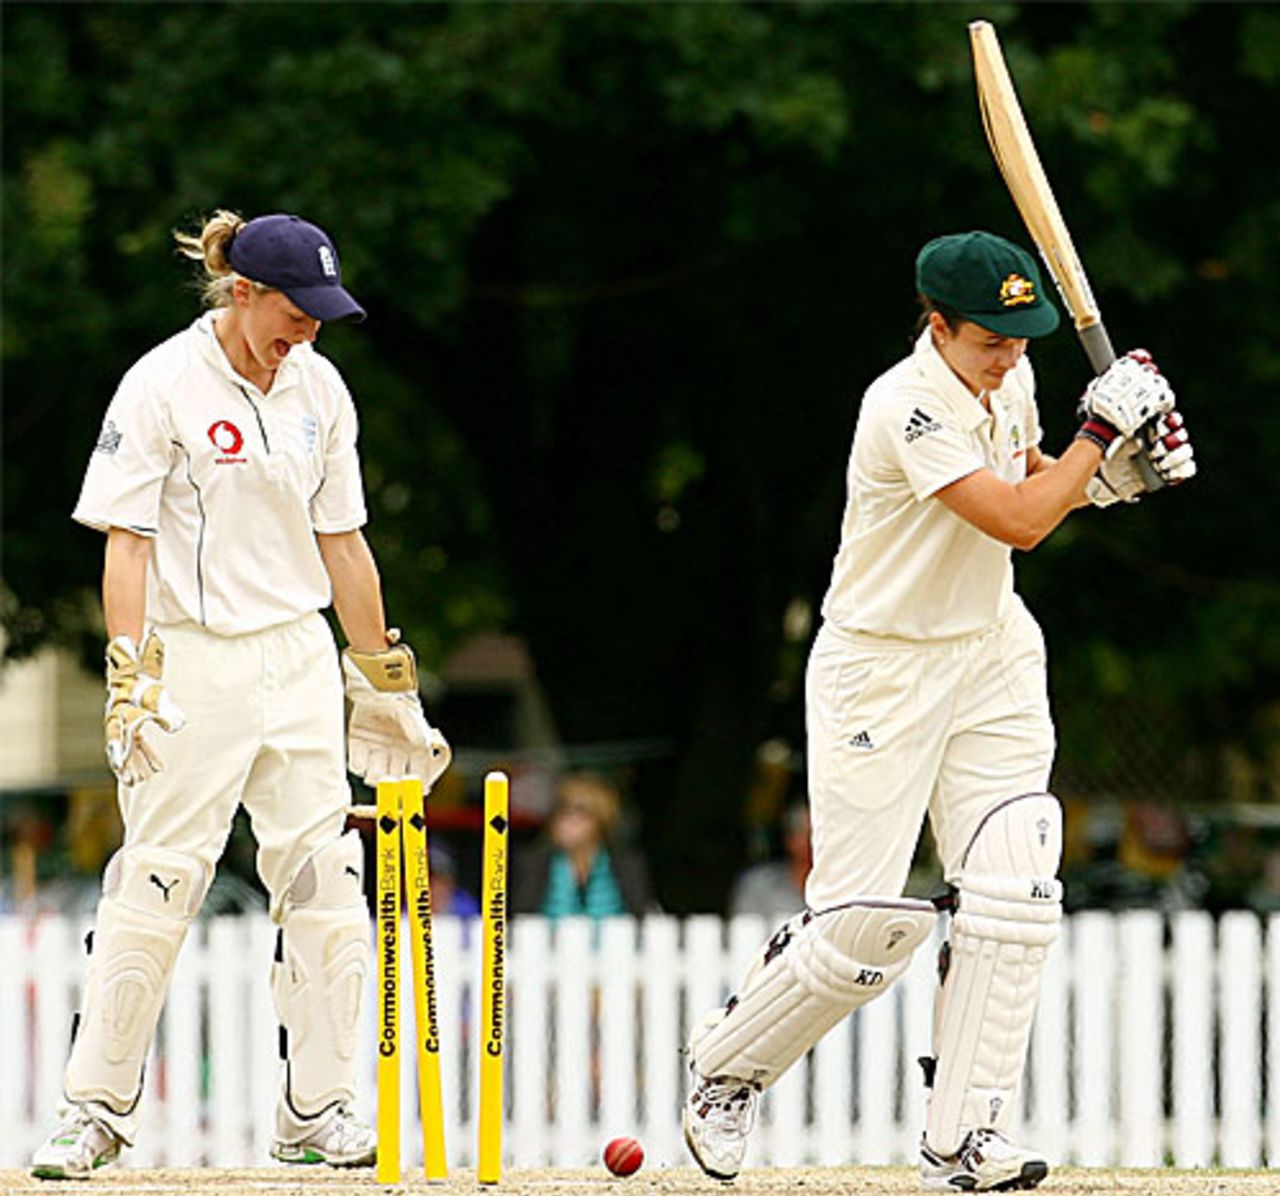 Kirsten Pike furthered the score with 10 before being bowled, Australia v England, only Test, Bowral, 3rd day, February 17, 2008